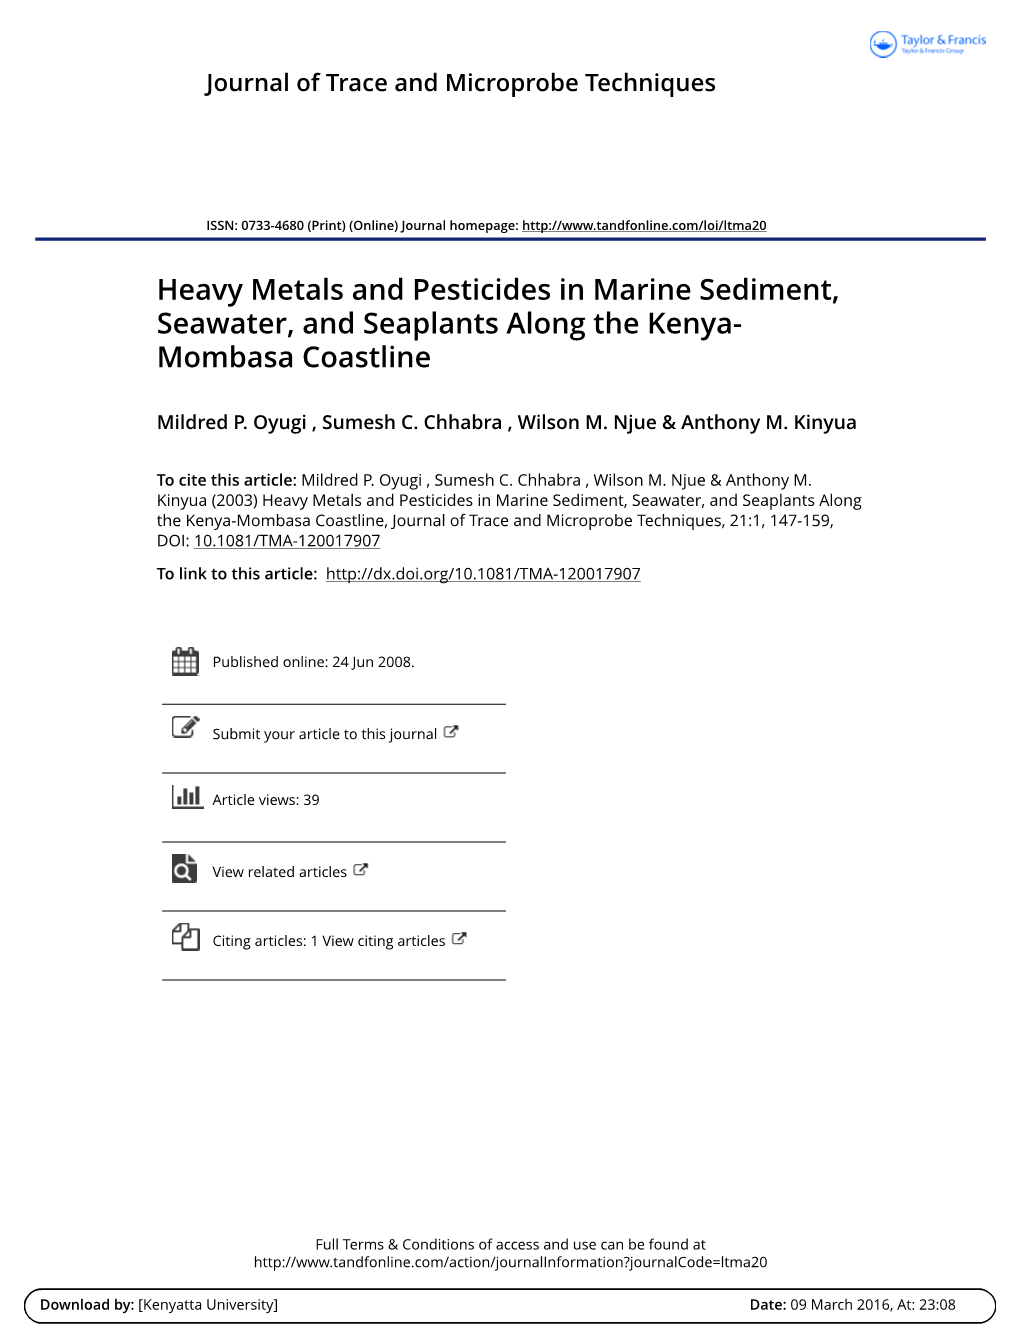 Heavy Metals and Pesticides in Marine Sediment, Seawater, and Seaplants Along the Kenya- Mombasa Coastline